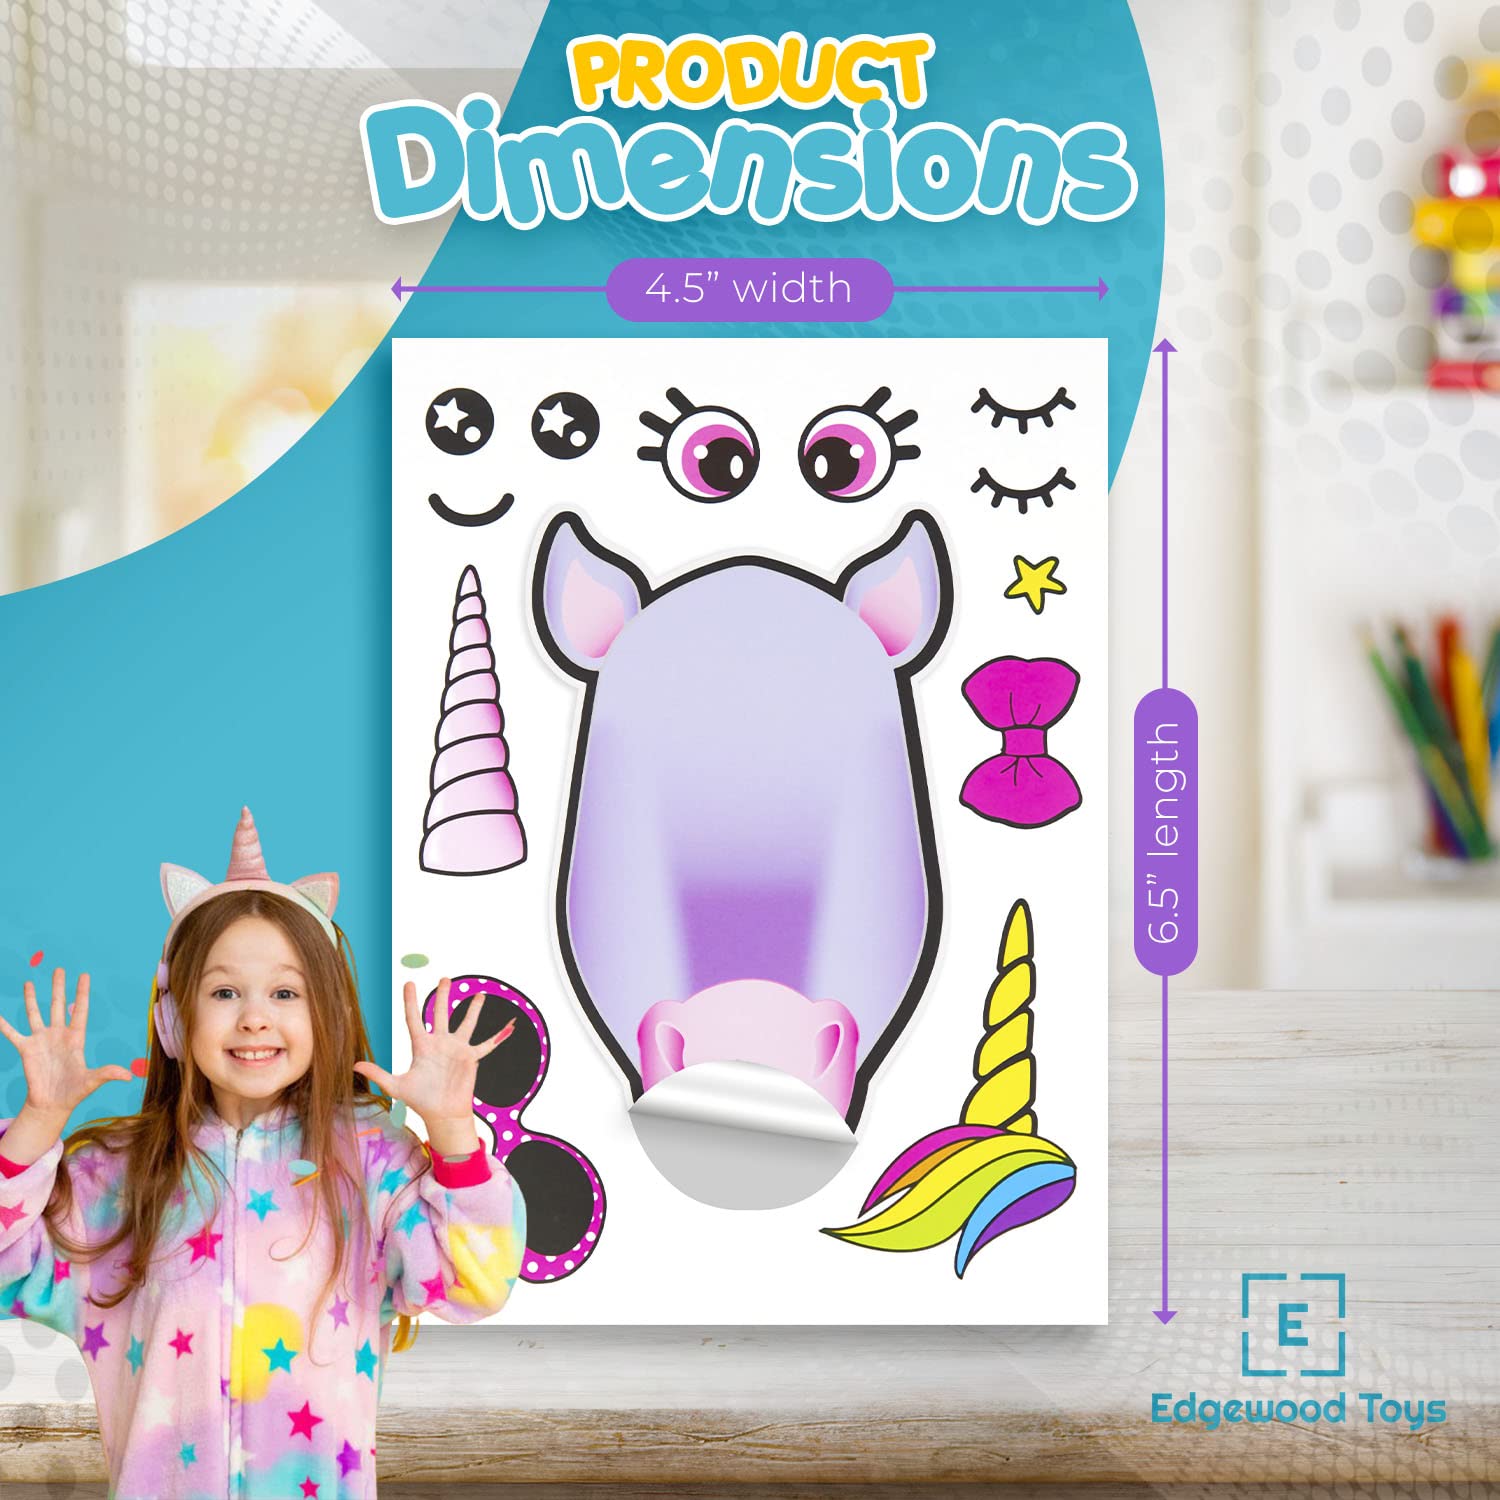 24 Make A Unicorn Stickers for Kids - Great Unicorn Theme Birthday Party Favors - Fun Craft Project for Children 3+ - Let Your Kids Get Creative & Design Their Favorite Unicorn Stickers